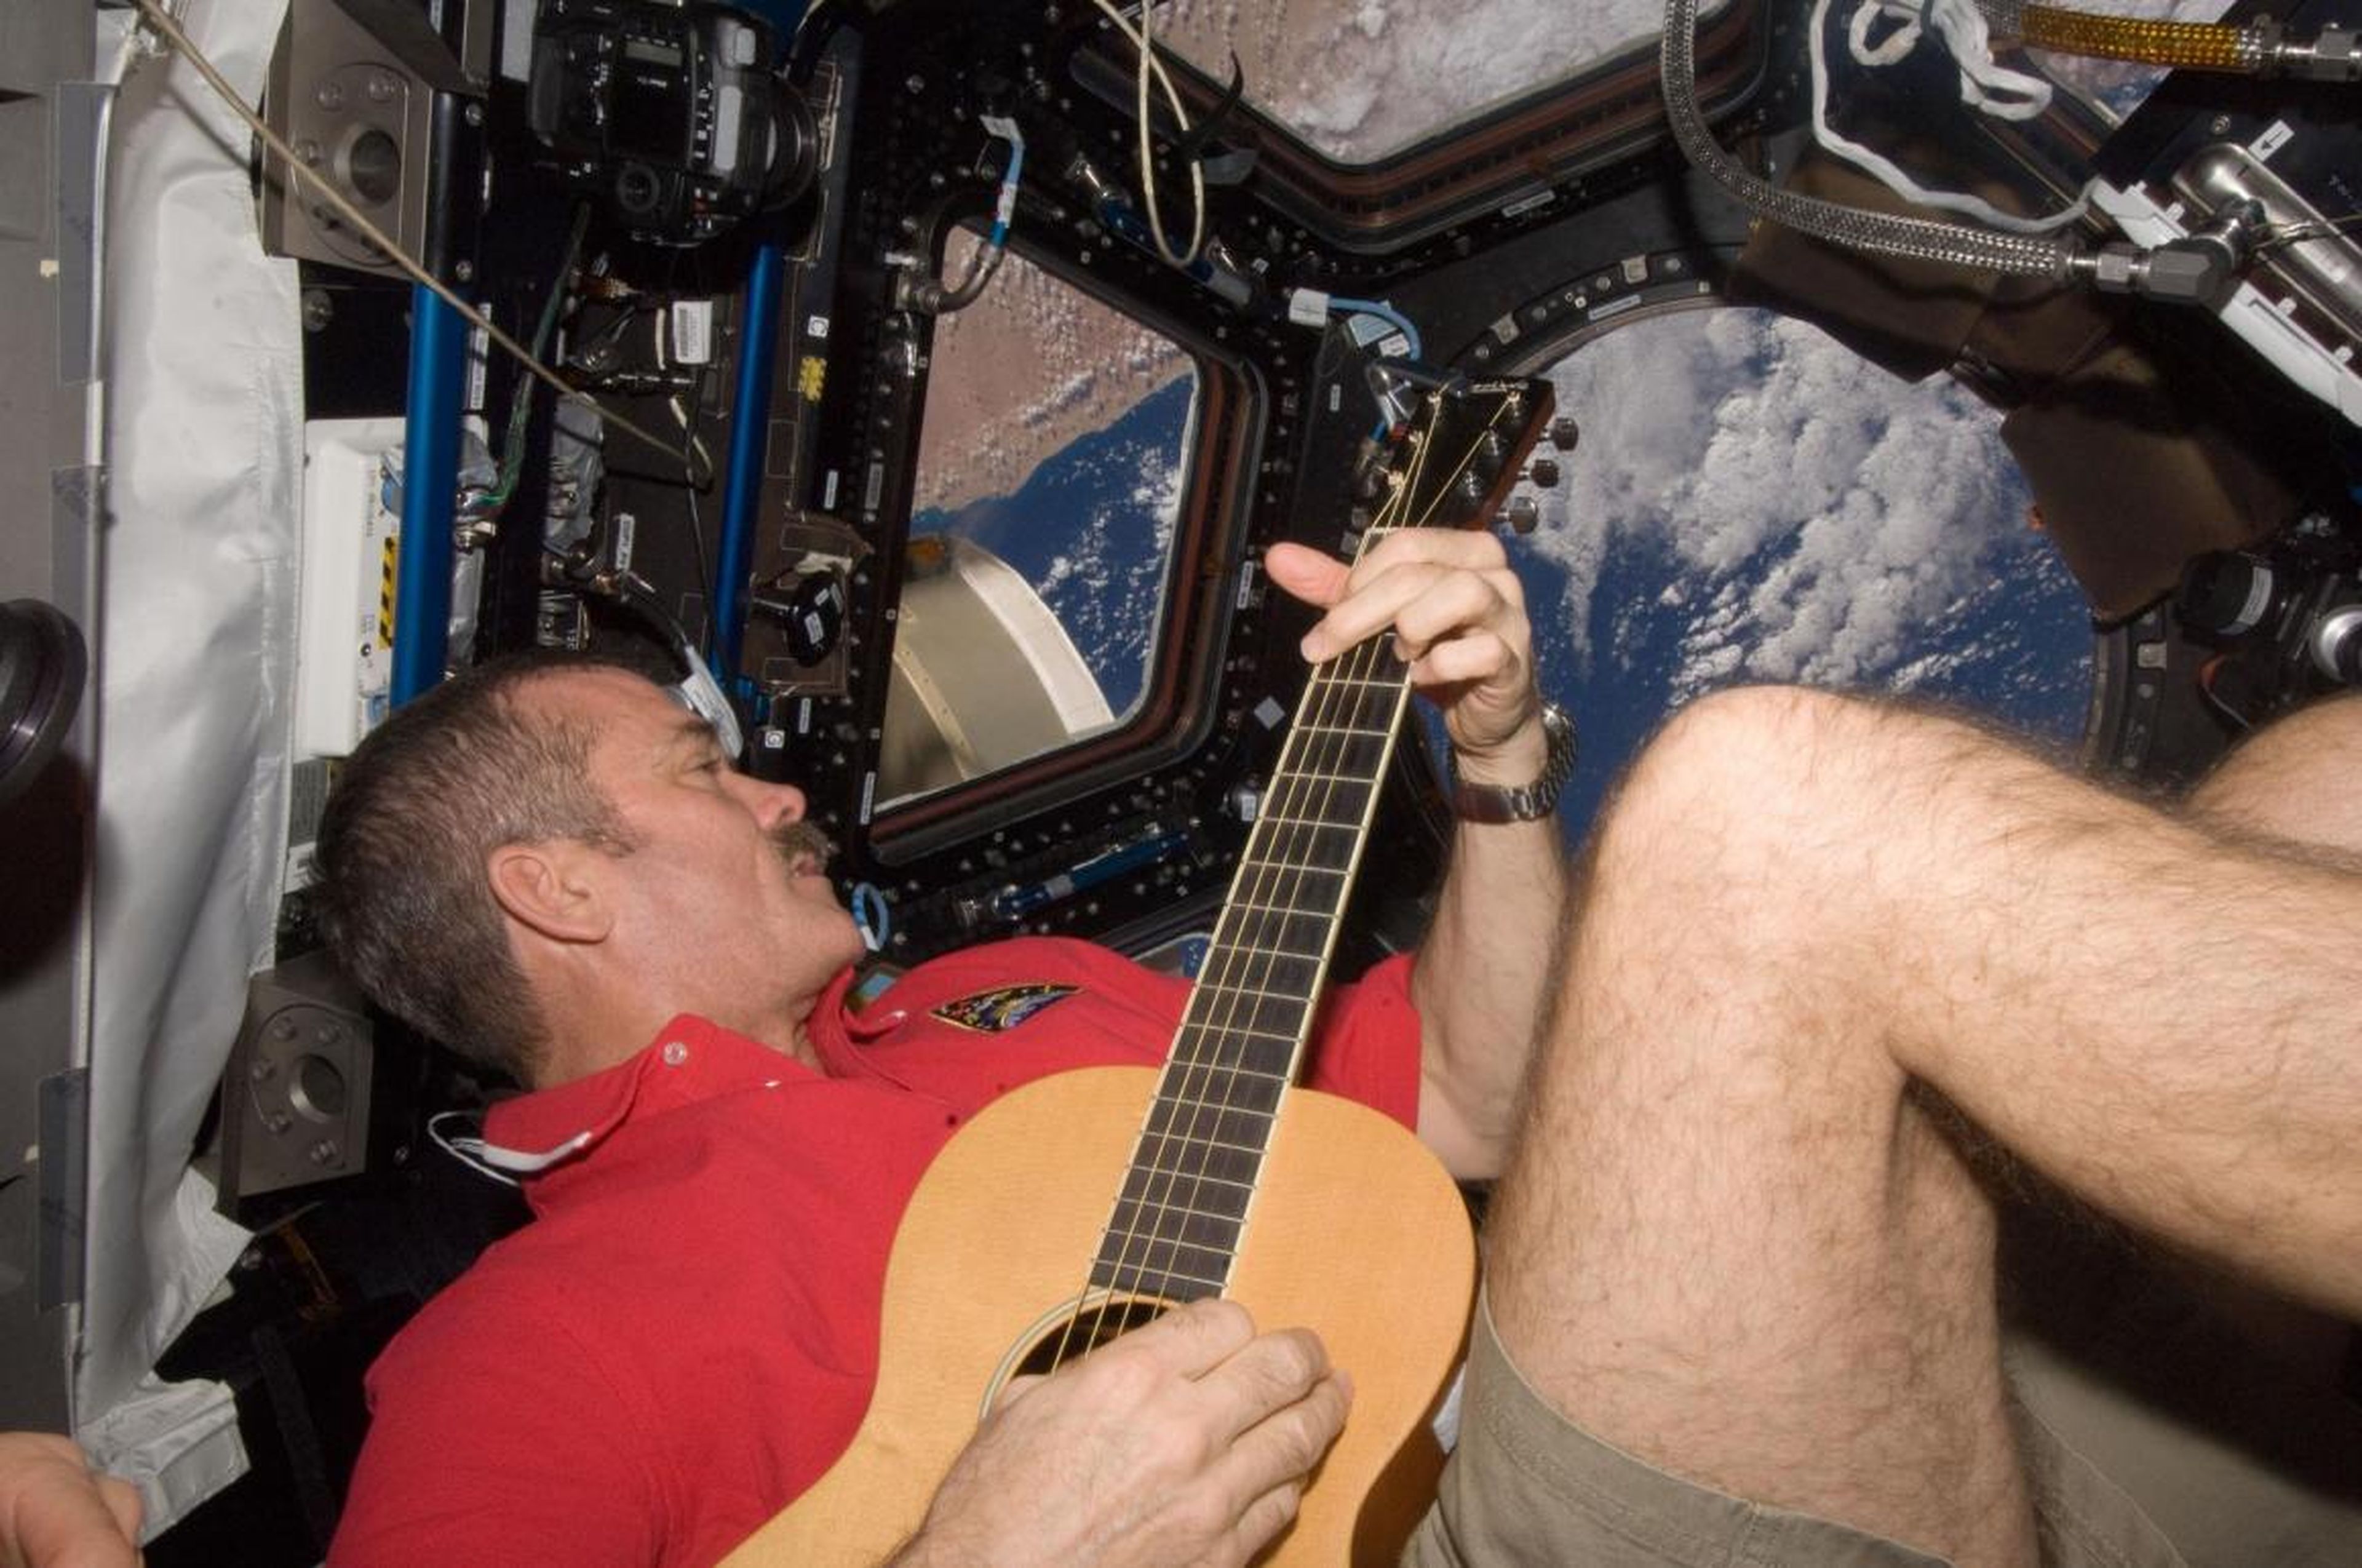 Canadian astronaut Chris Hadfield is famous for his orbital musical renditions, and Christmas is no exception.